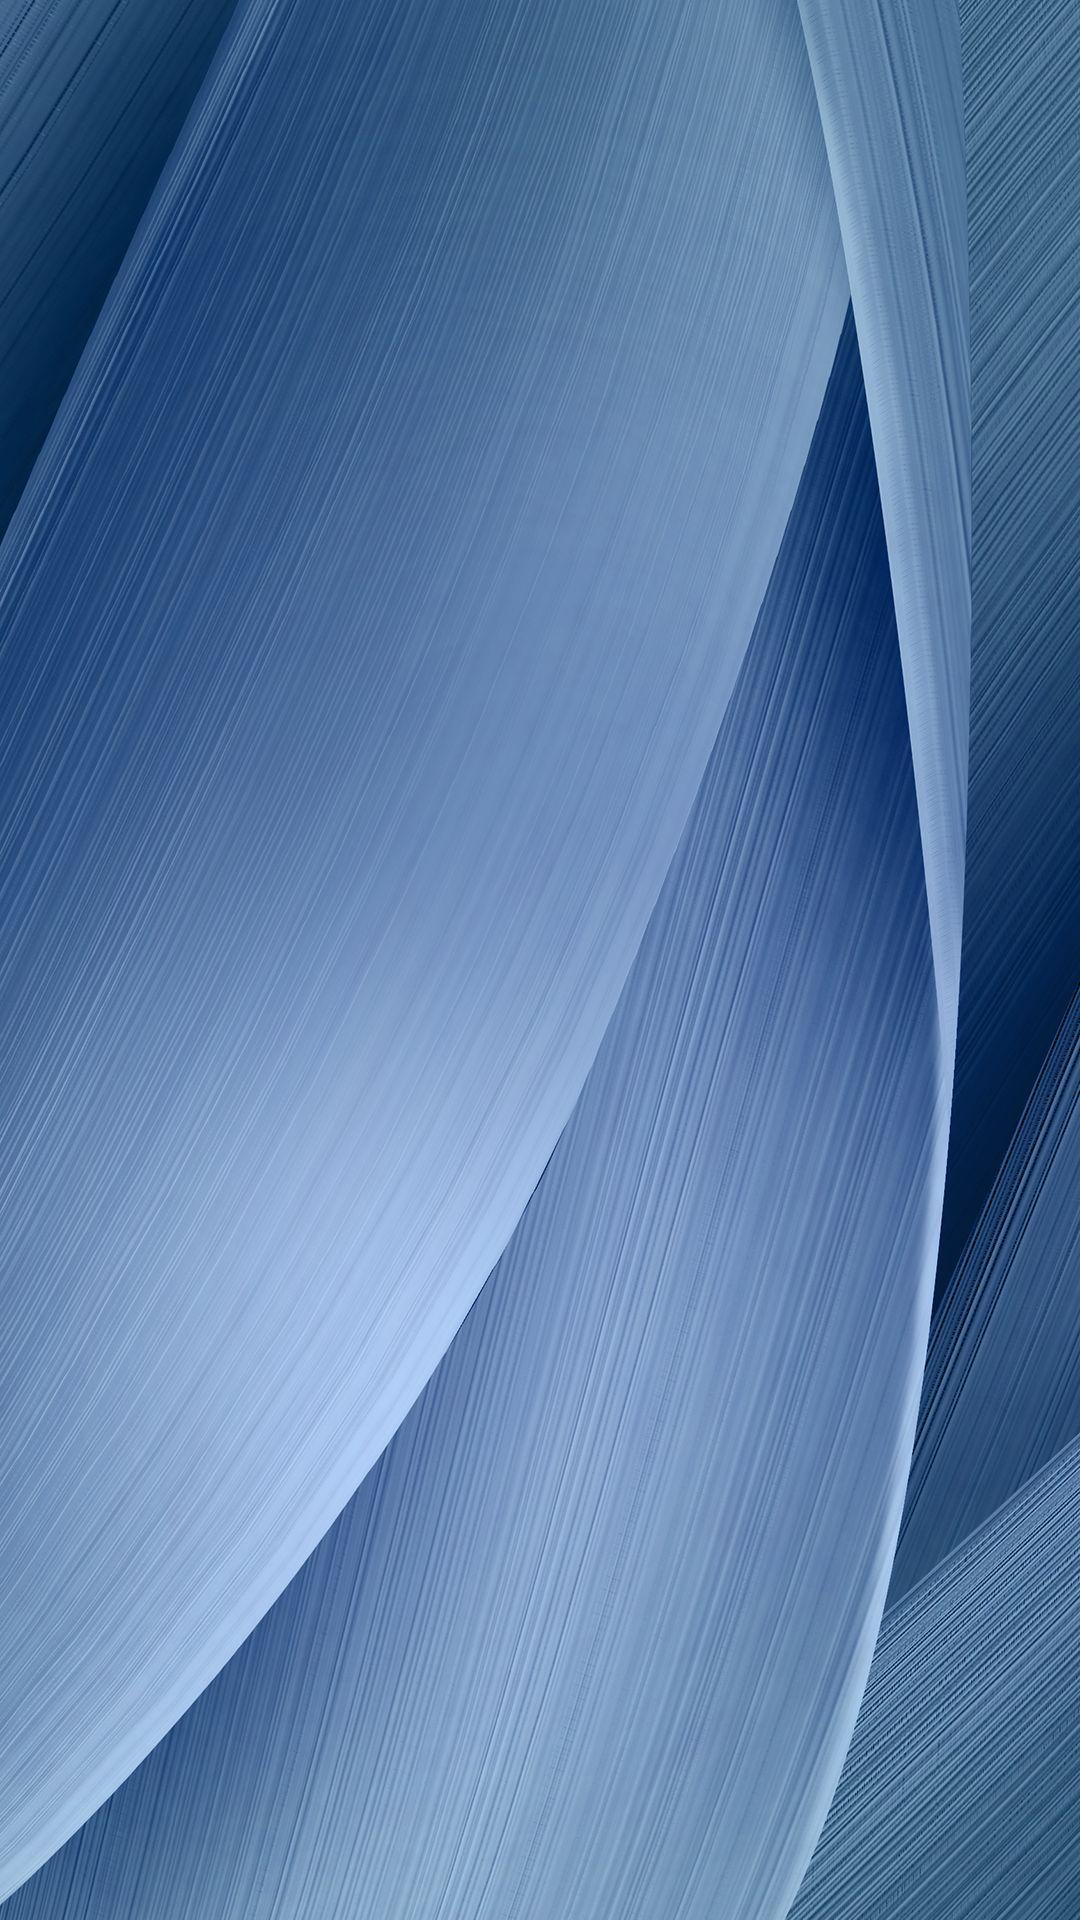 Abstract HD Wallpaper For Mobile Devices 105